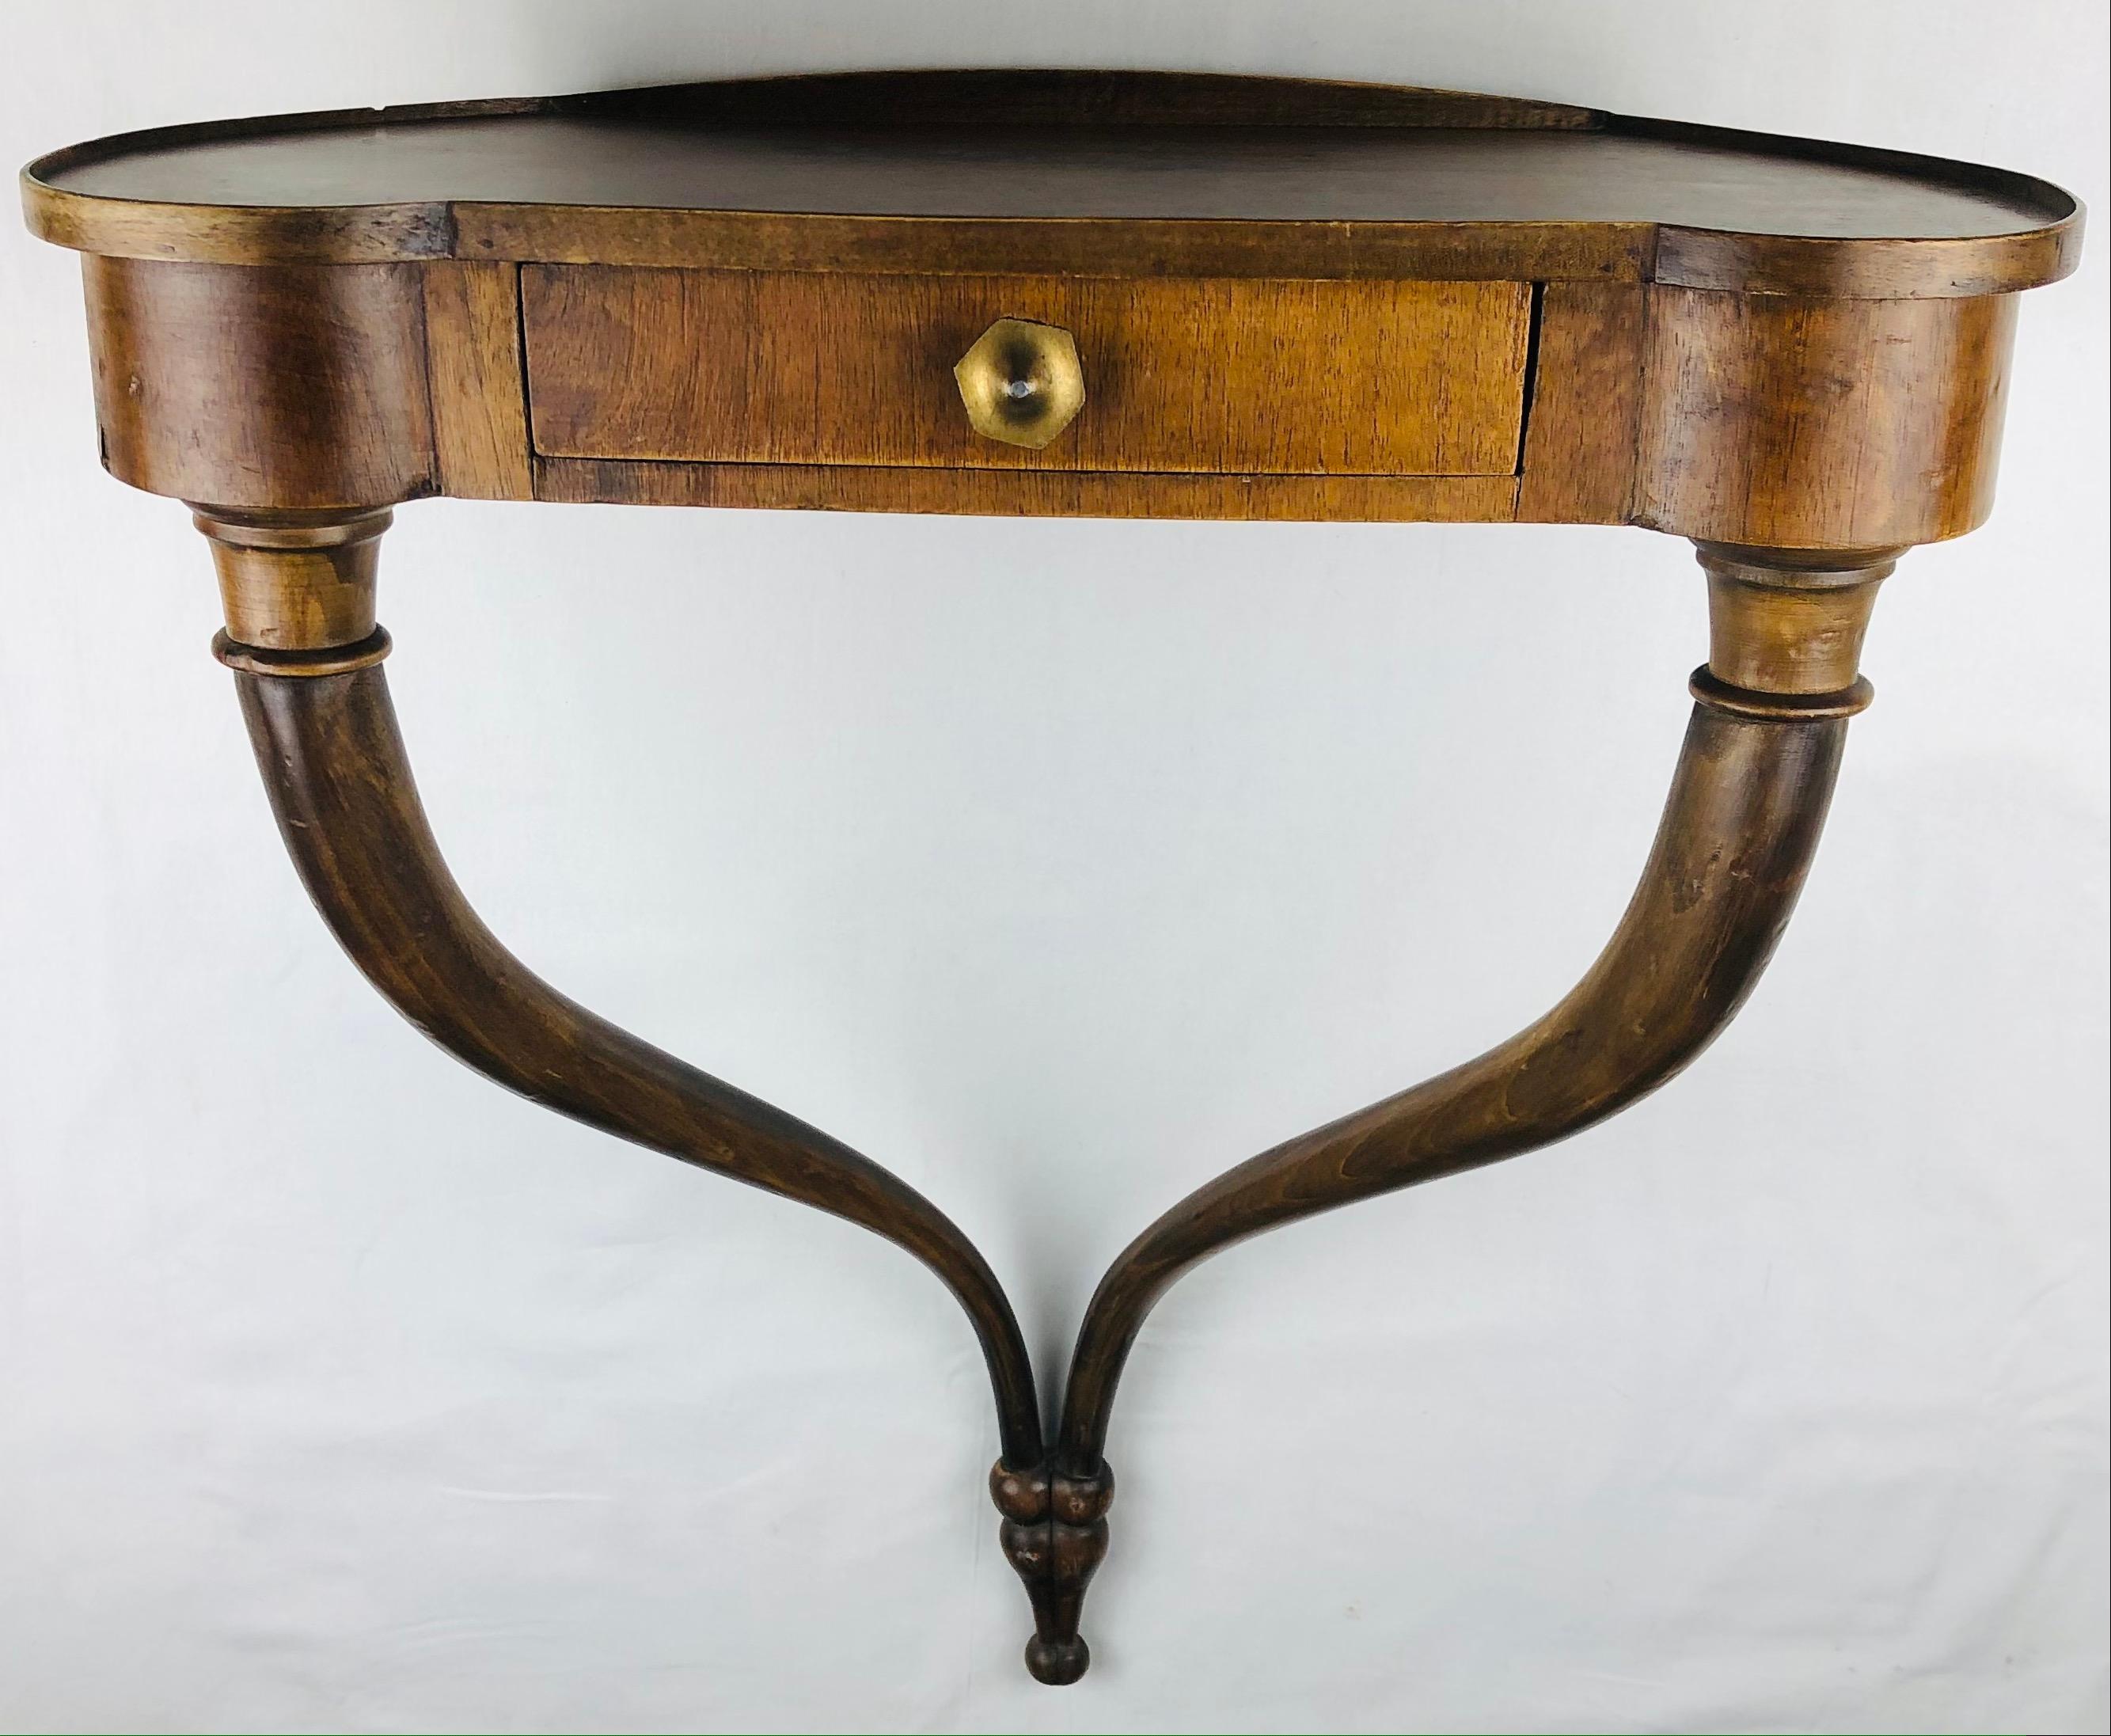 A beautiful pair of serpentine shaped 20th century Venetian wall-mounted consoles in a fantastic rich brown walnut wood ending with two side cabriole legs joined at the bottom. The beautifully curvy shaped top is enriched by a practical drawer with